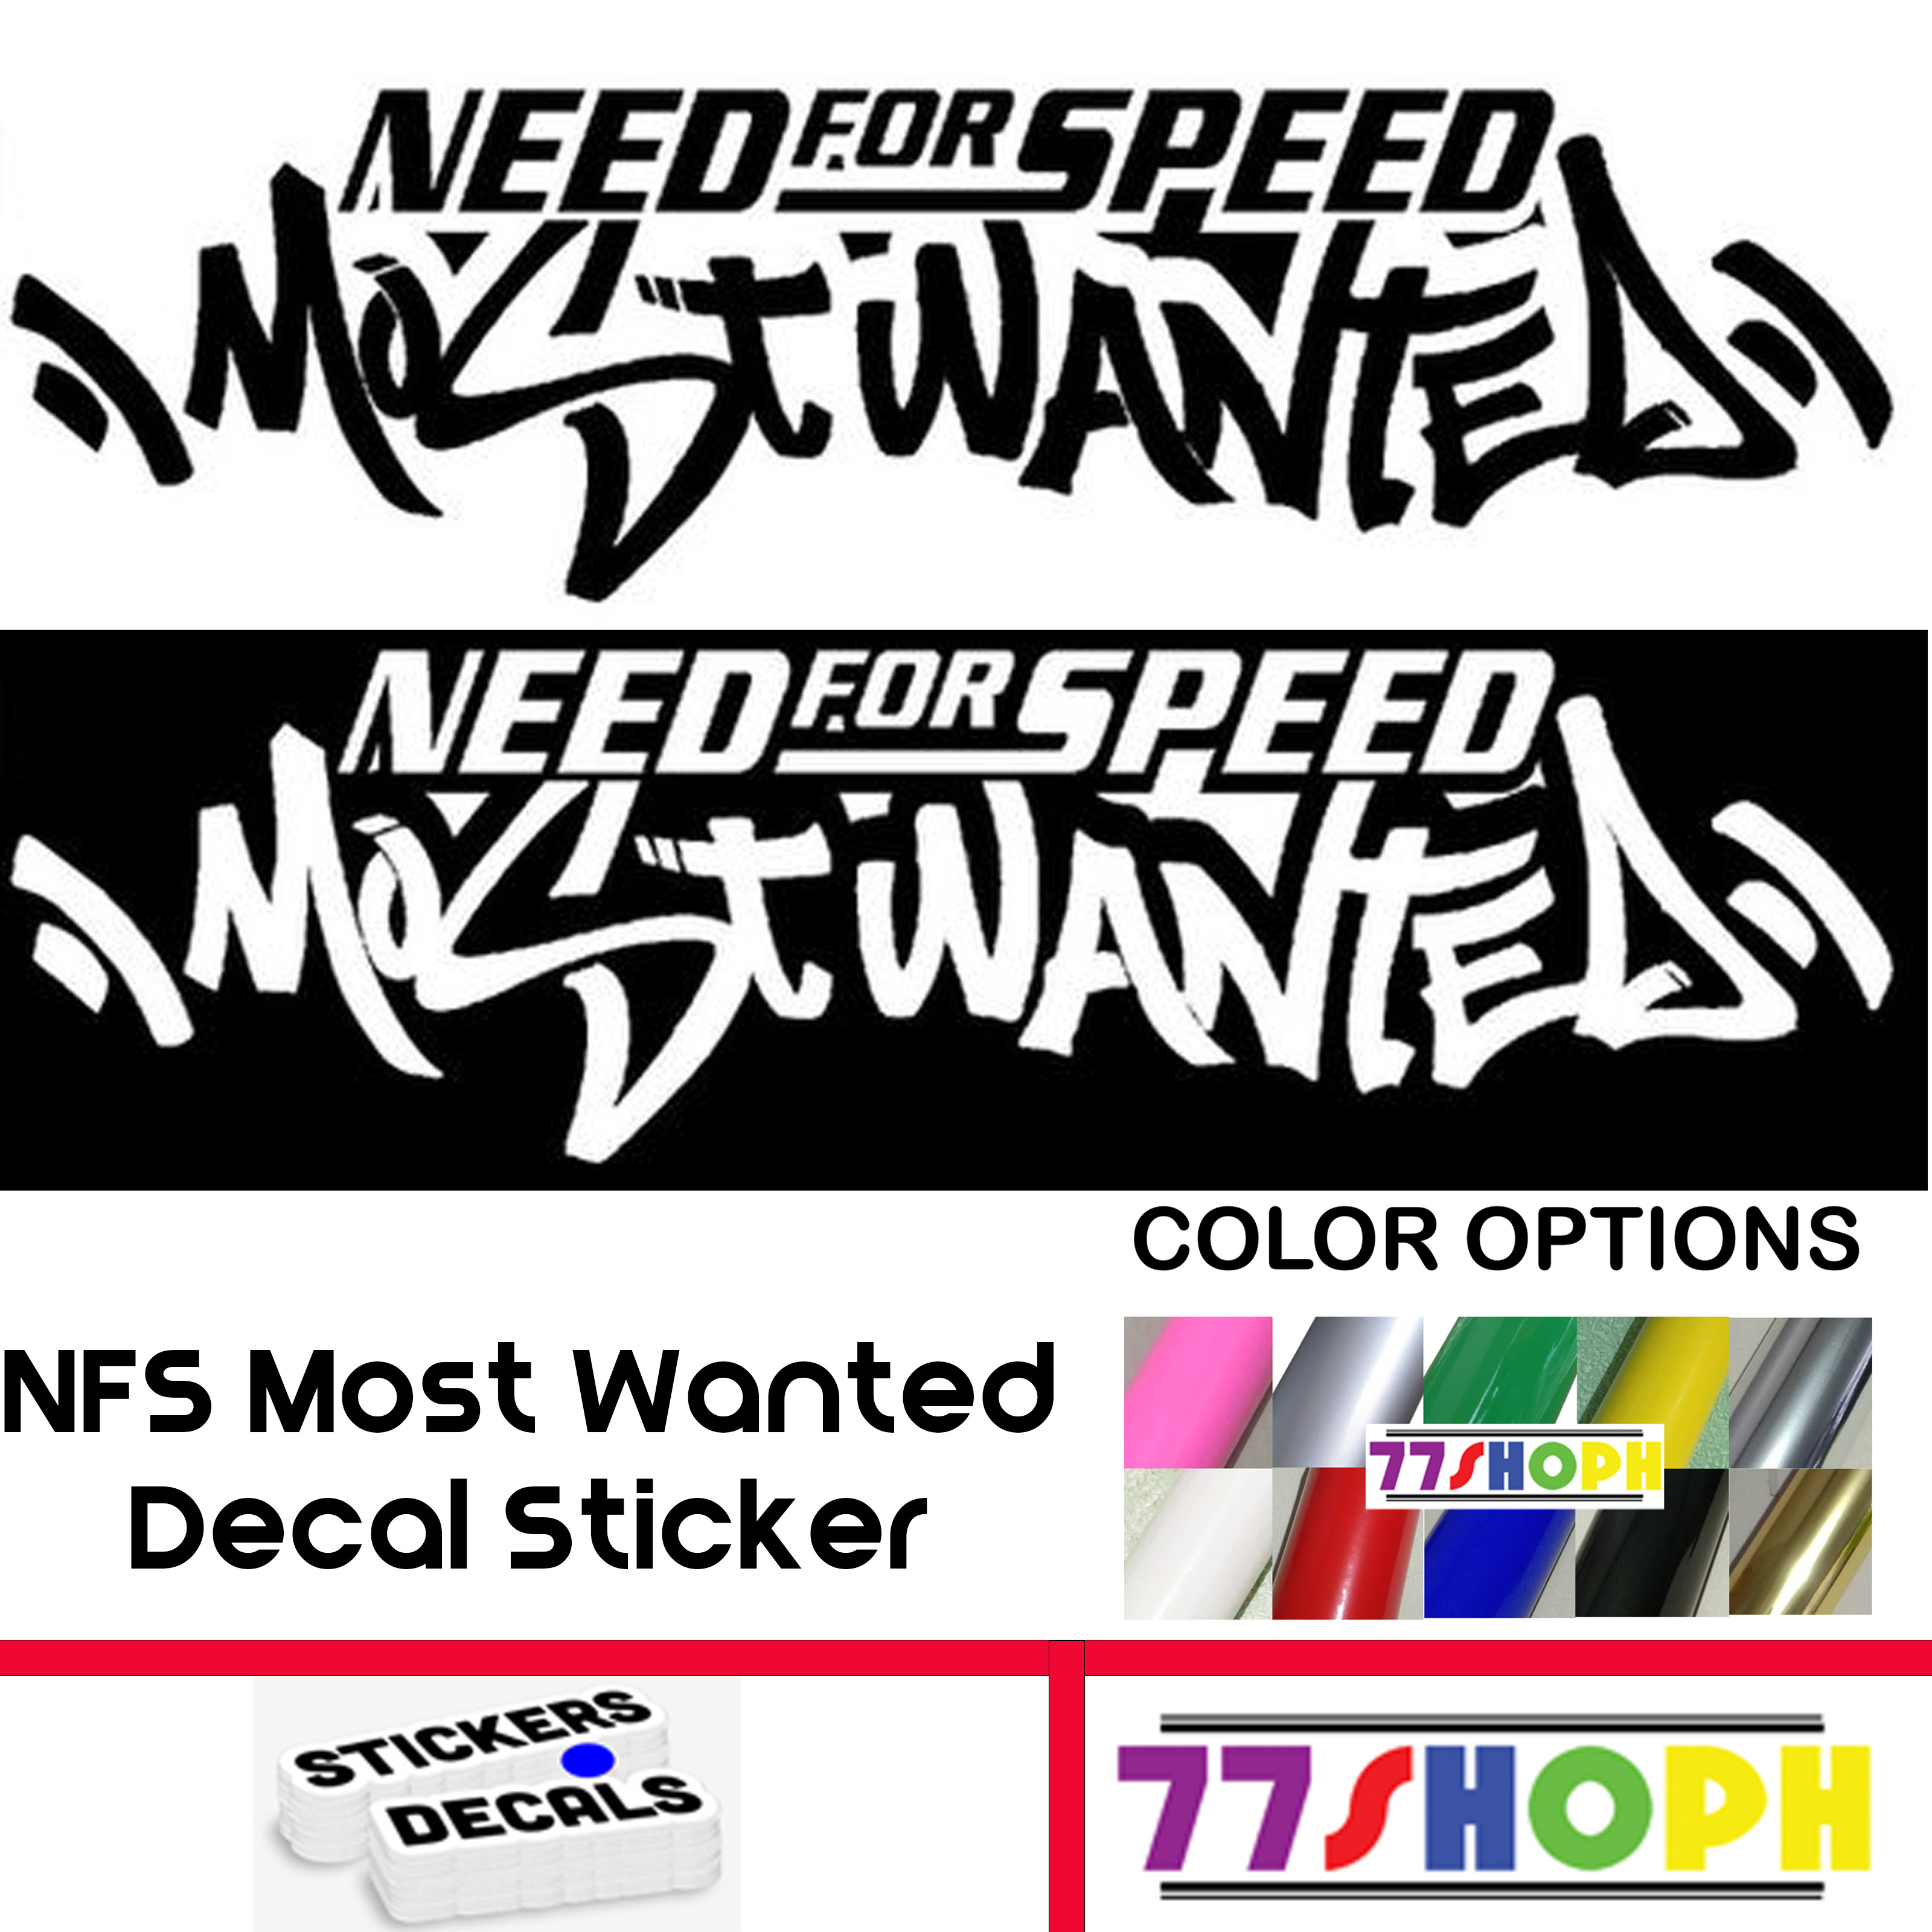 NFS Most Wanted Decal Sticker